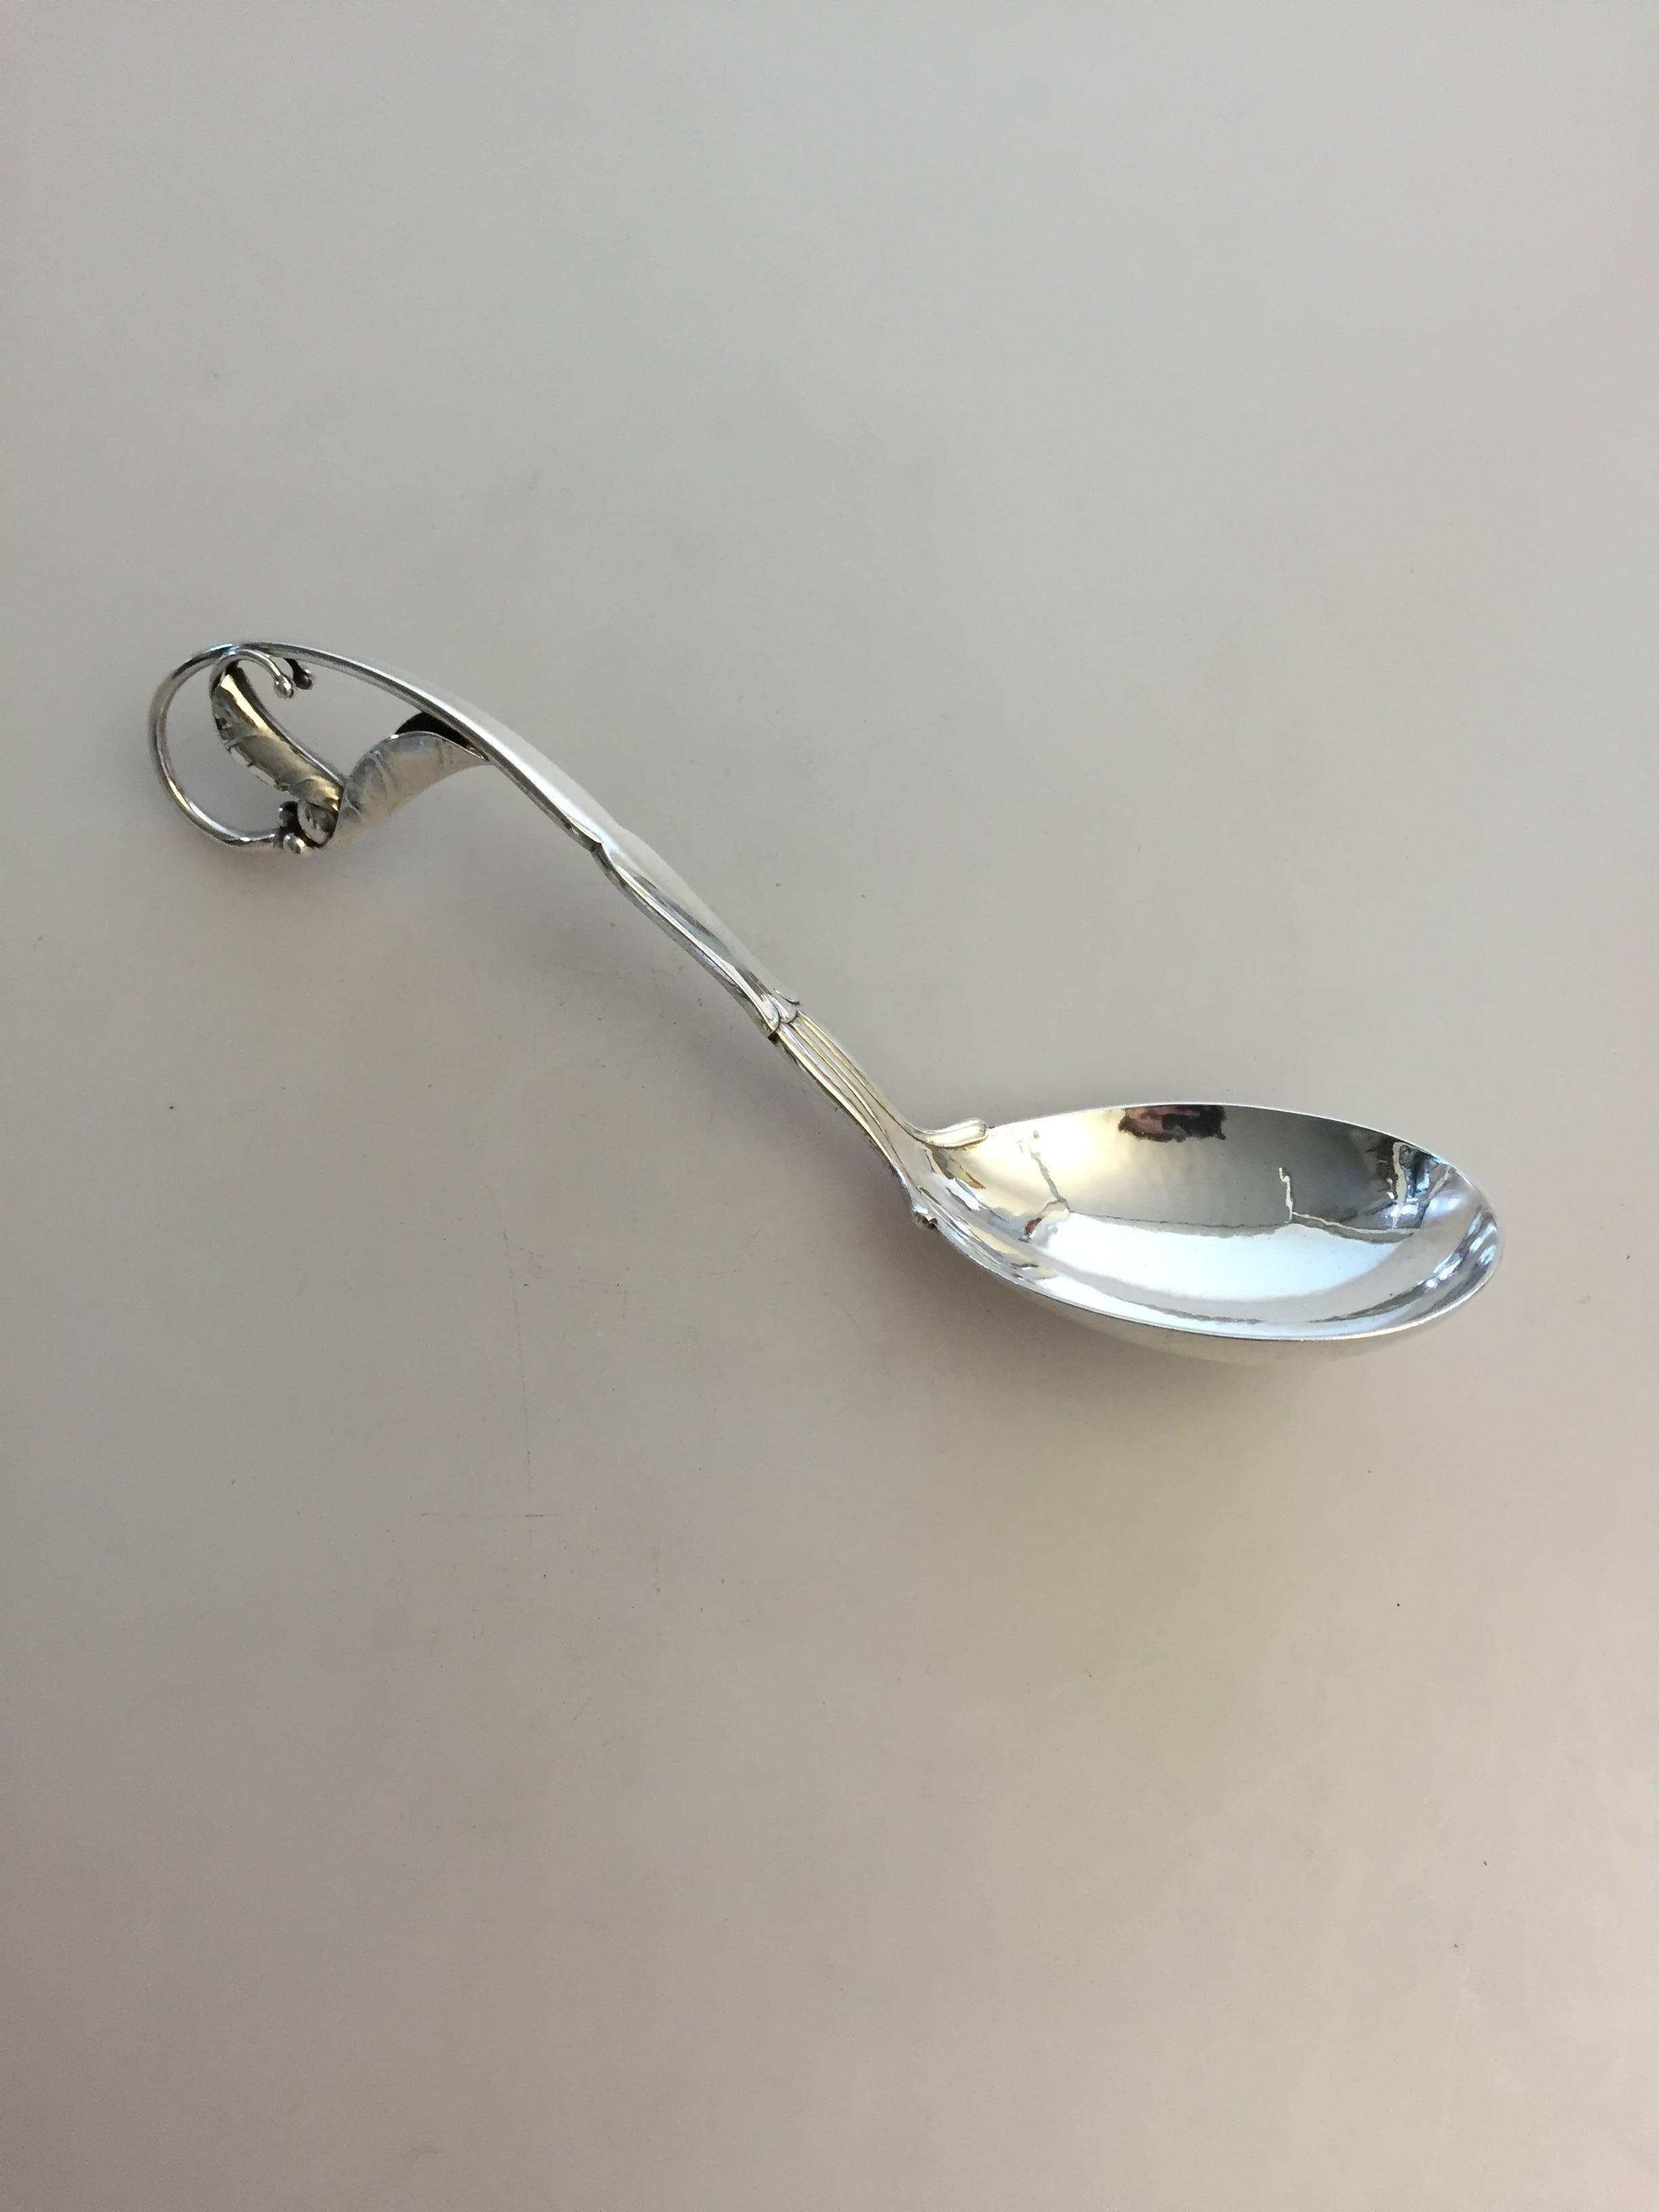 Georg Jensen sterling silver ornamental spoon from #141. The spoon is from 1931. 

Measures: 20.6 cm L.
Weighs 78 g / 2.75 oz.